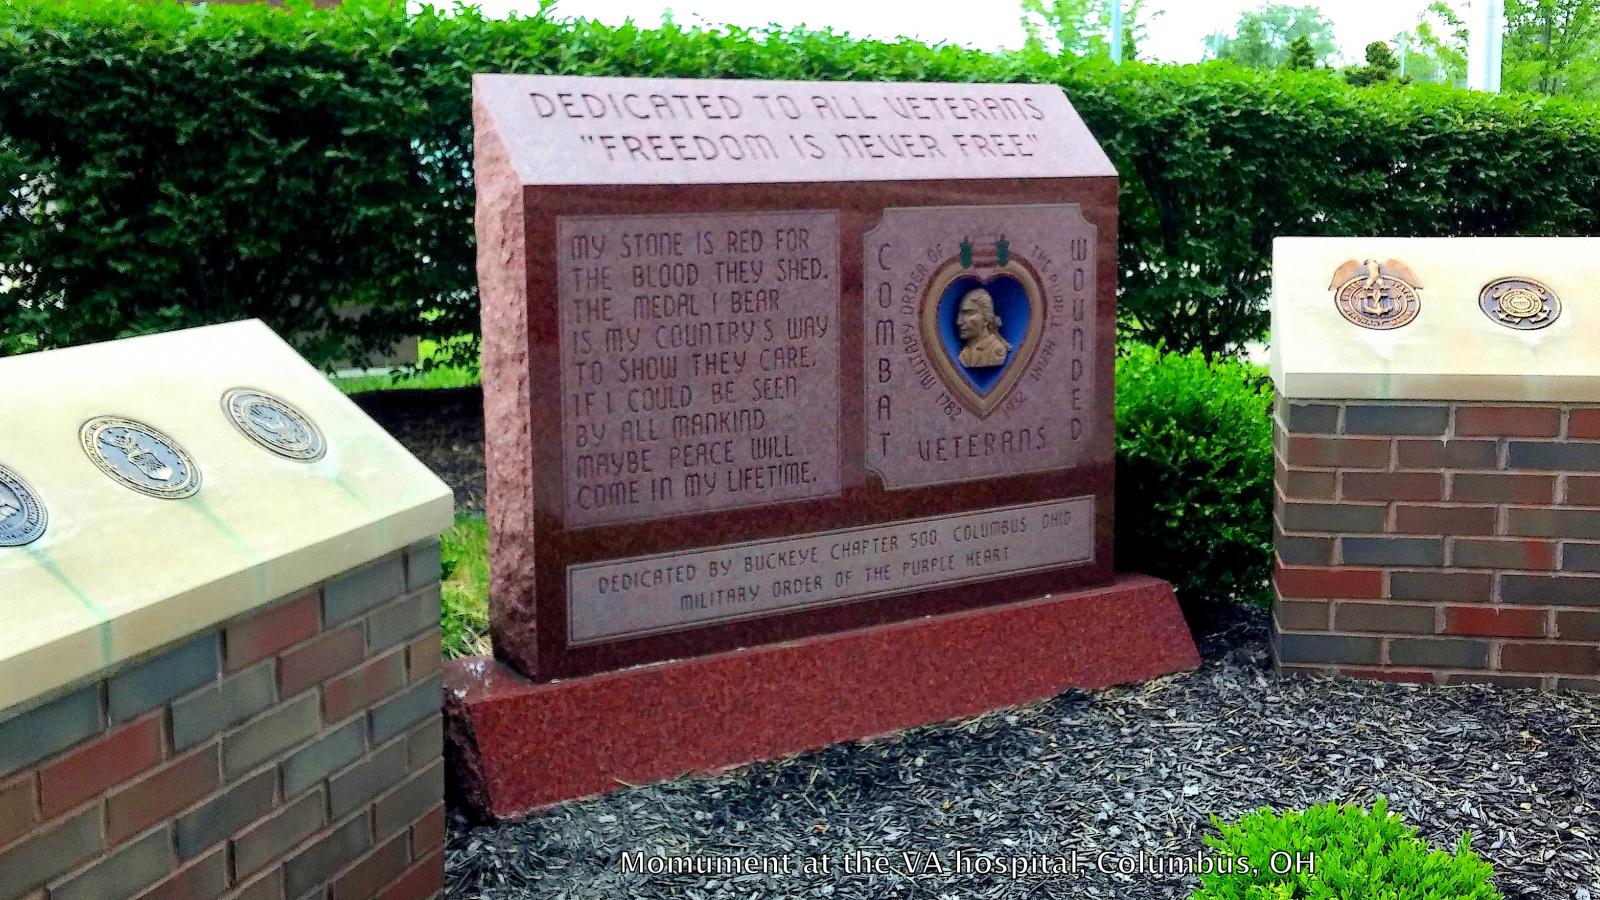 Monument at VA hospital “Freedom is never free”